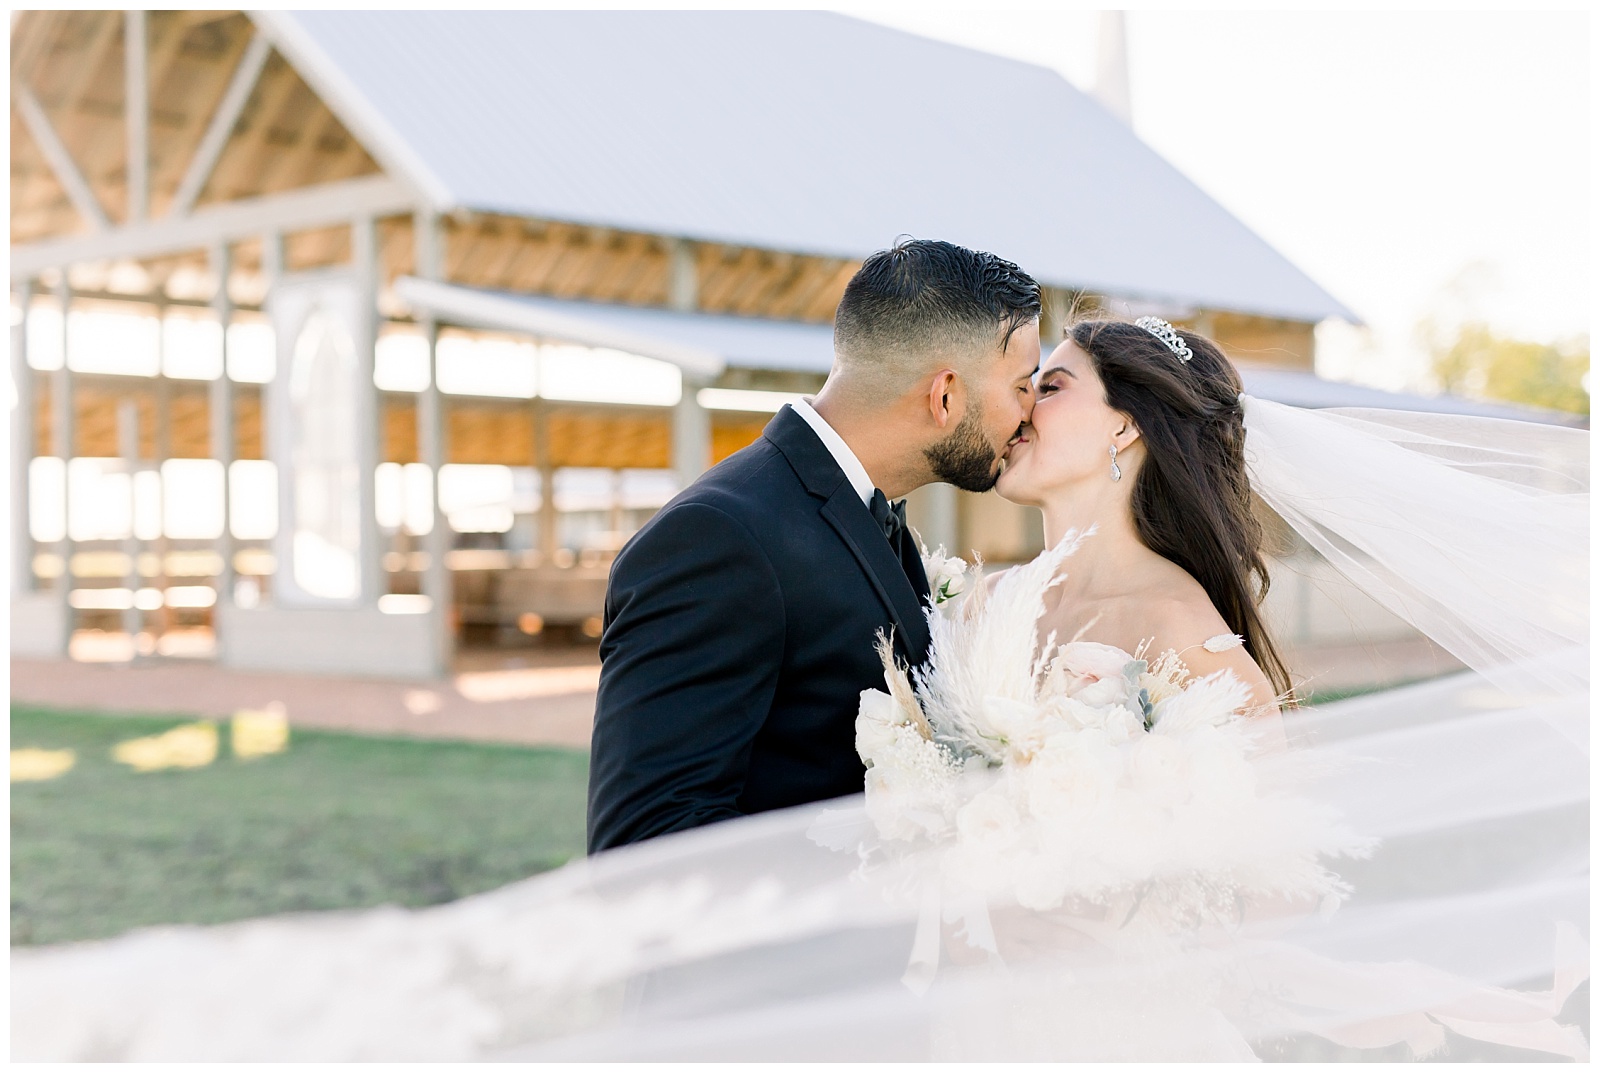 Bride and groom kiss while her veil sweeps in the wind around them at The Allen Farmhaus Wedding, TX by San Antonio-Maui-Destination Wedding Photographer | Monica Roberts Photography | www.monicaroberts.com